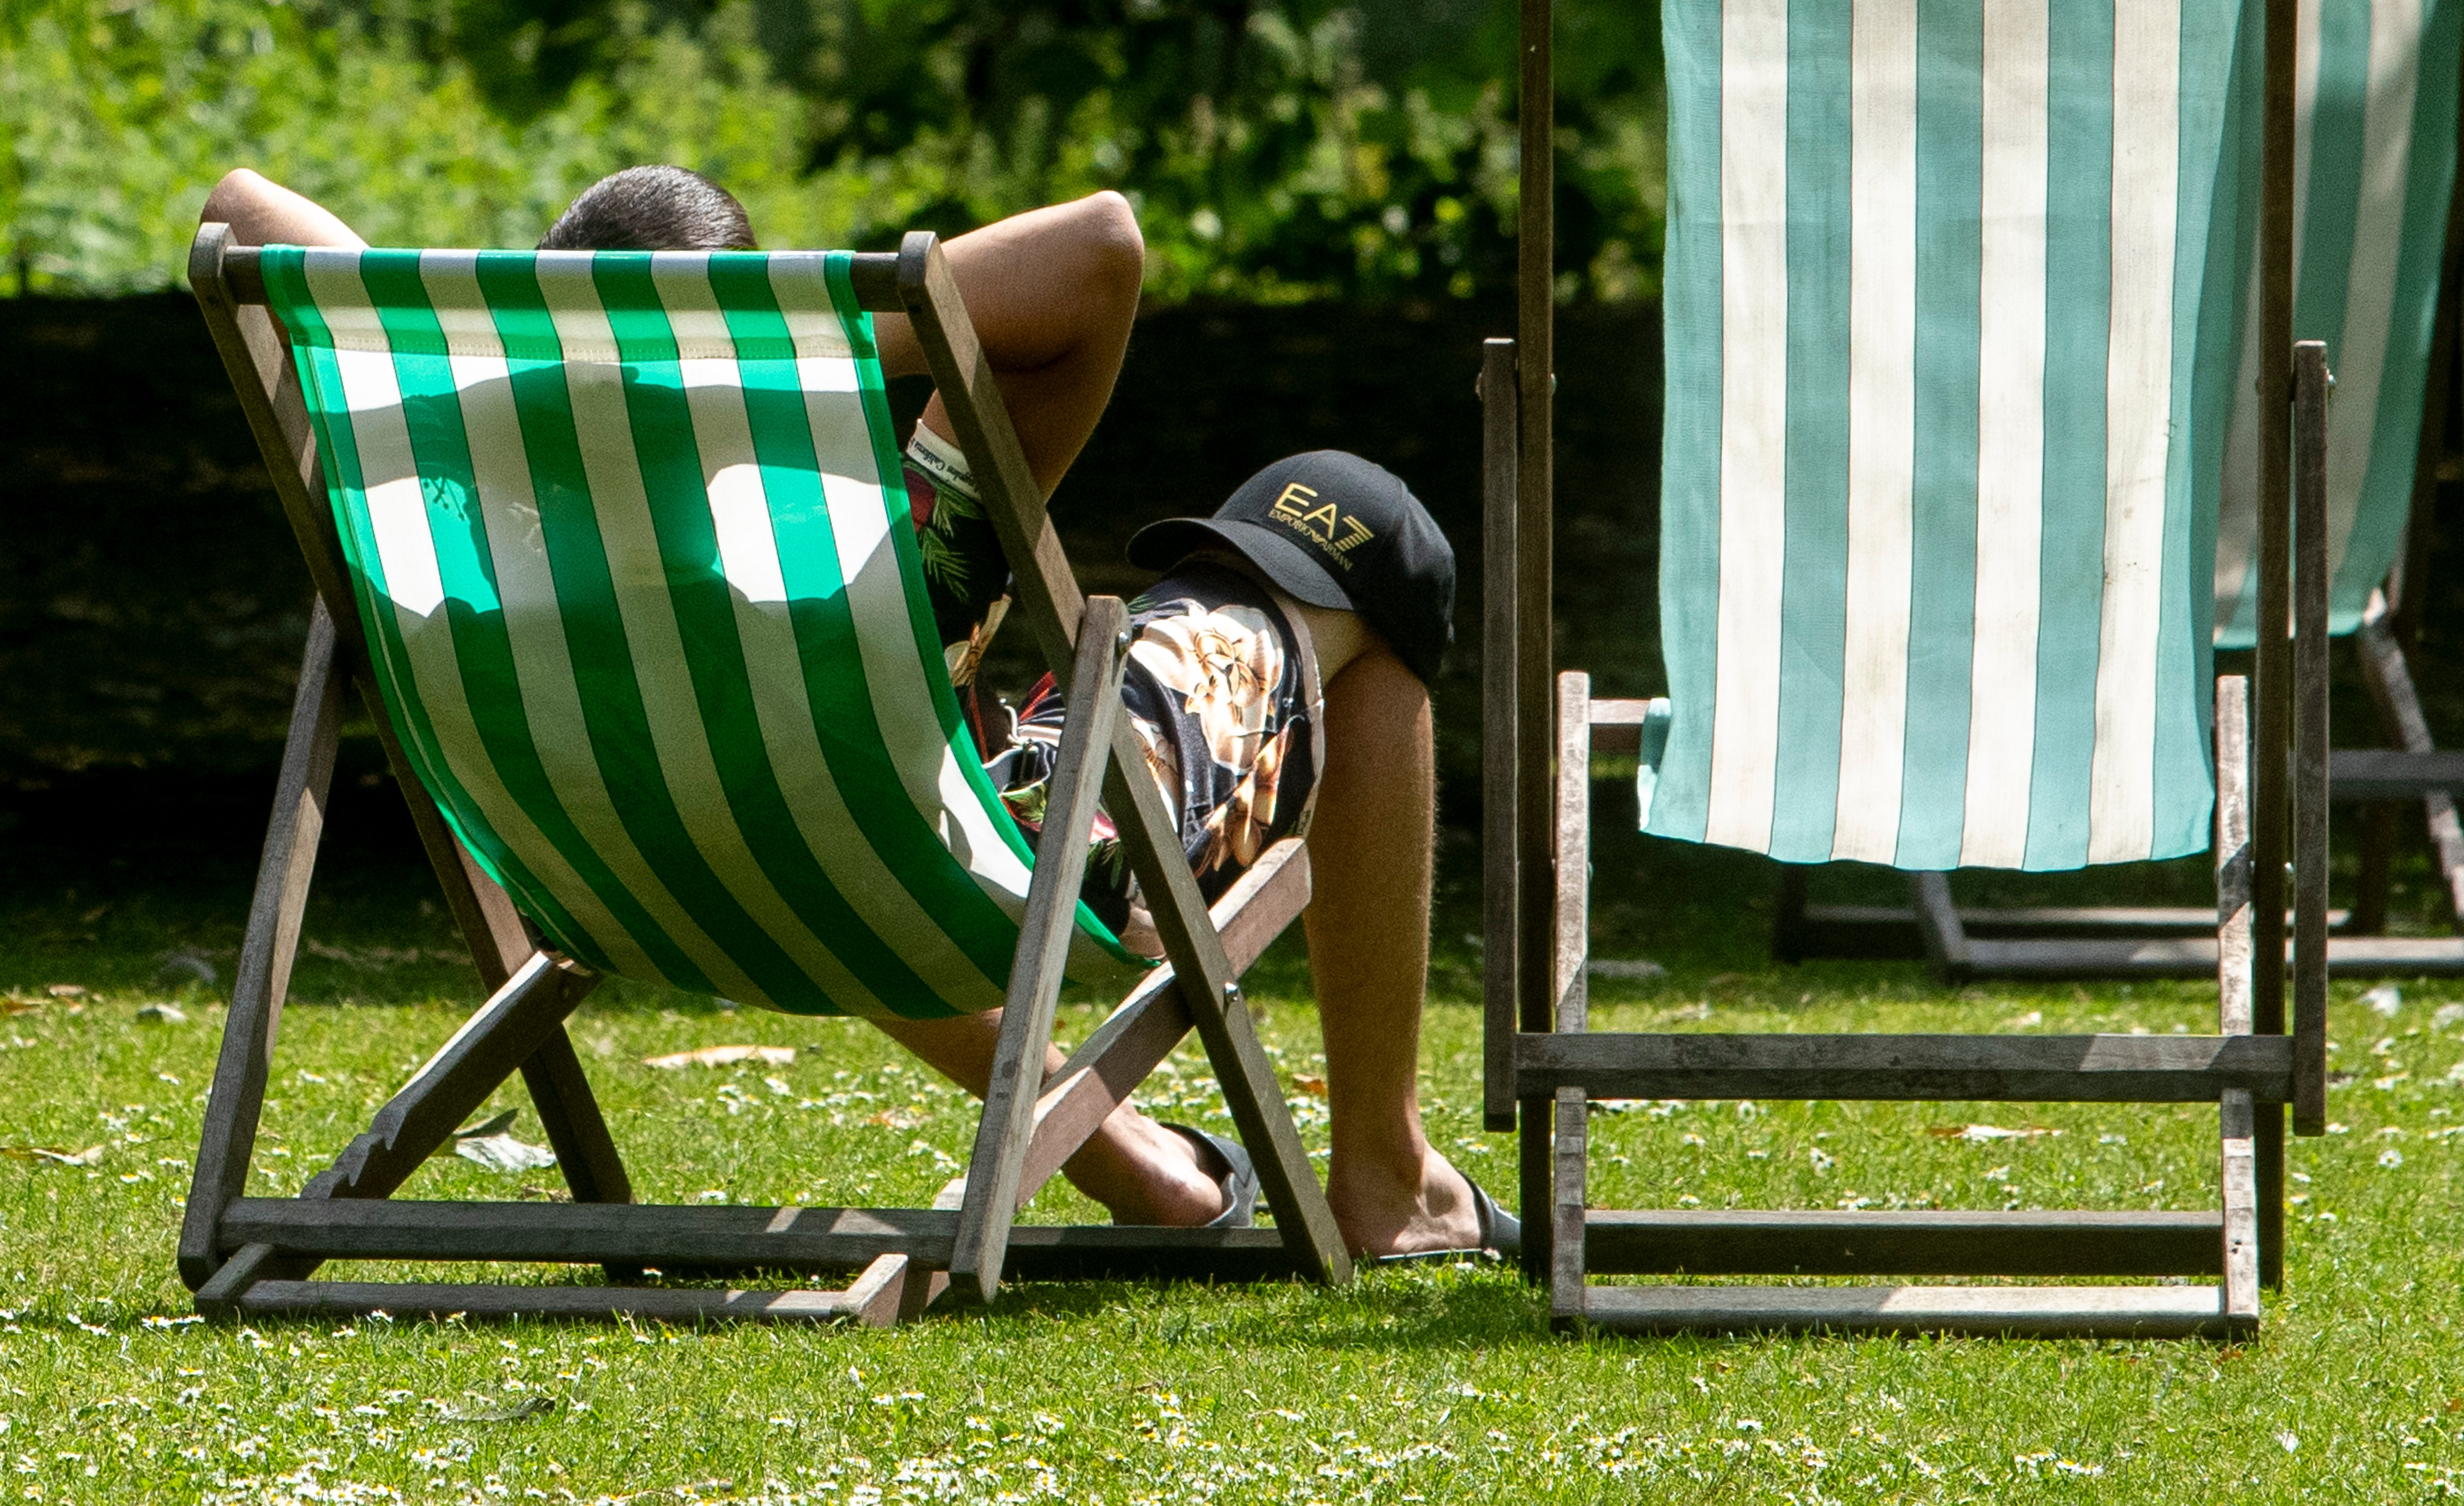 met office, mapped: heatwave in your area as temperatures set to hit 31c in uk